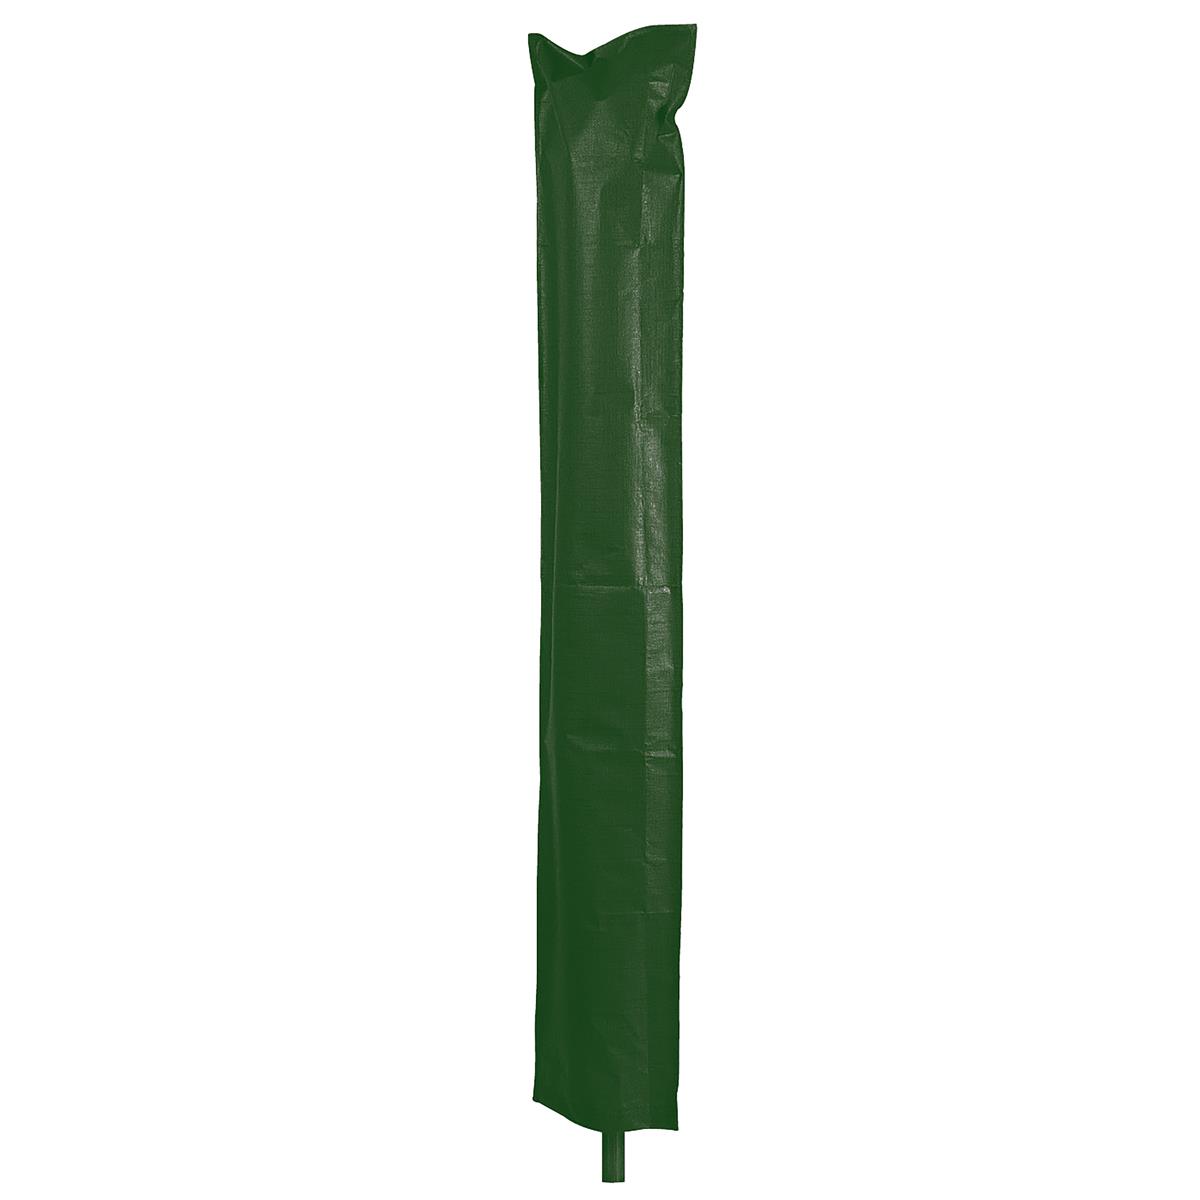 Image of Bosmere Protector 5000 Rotary Line Cover Dark Green